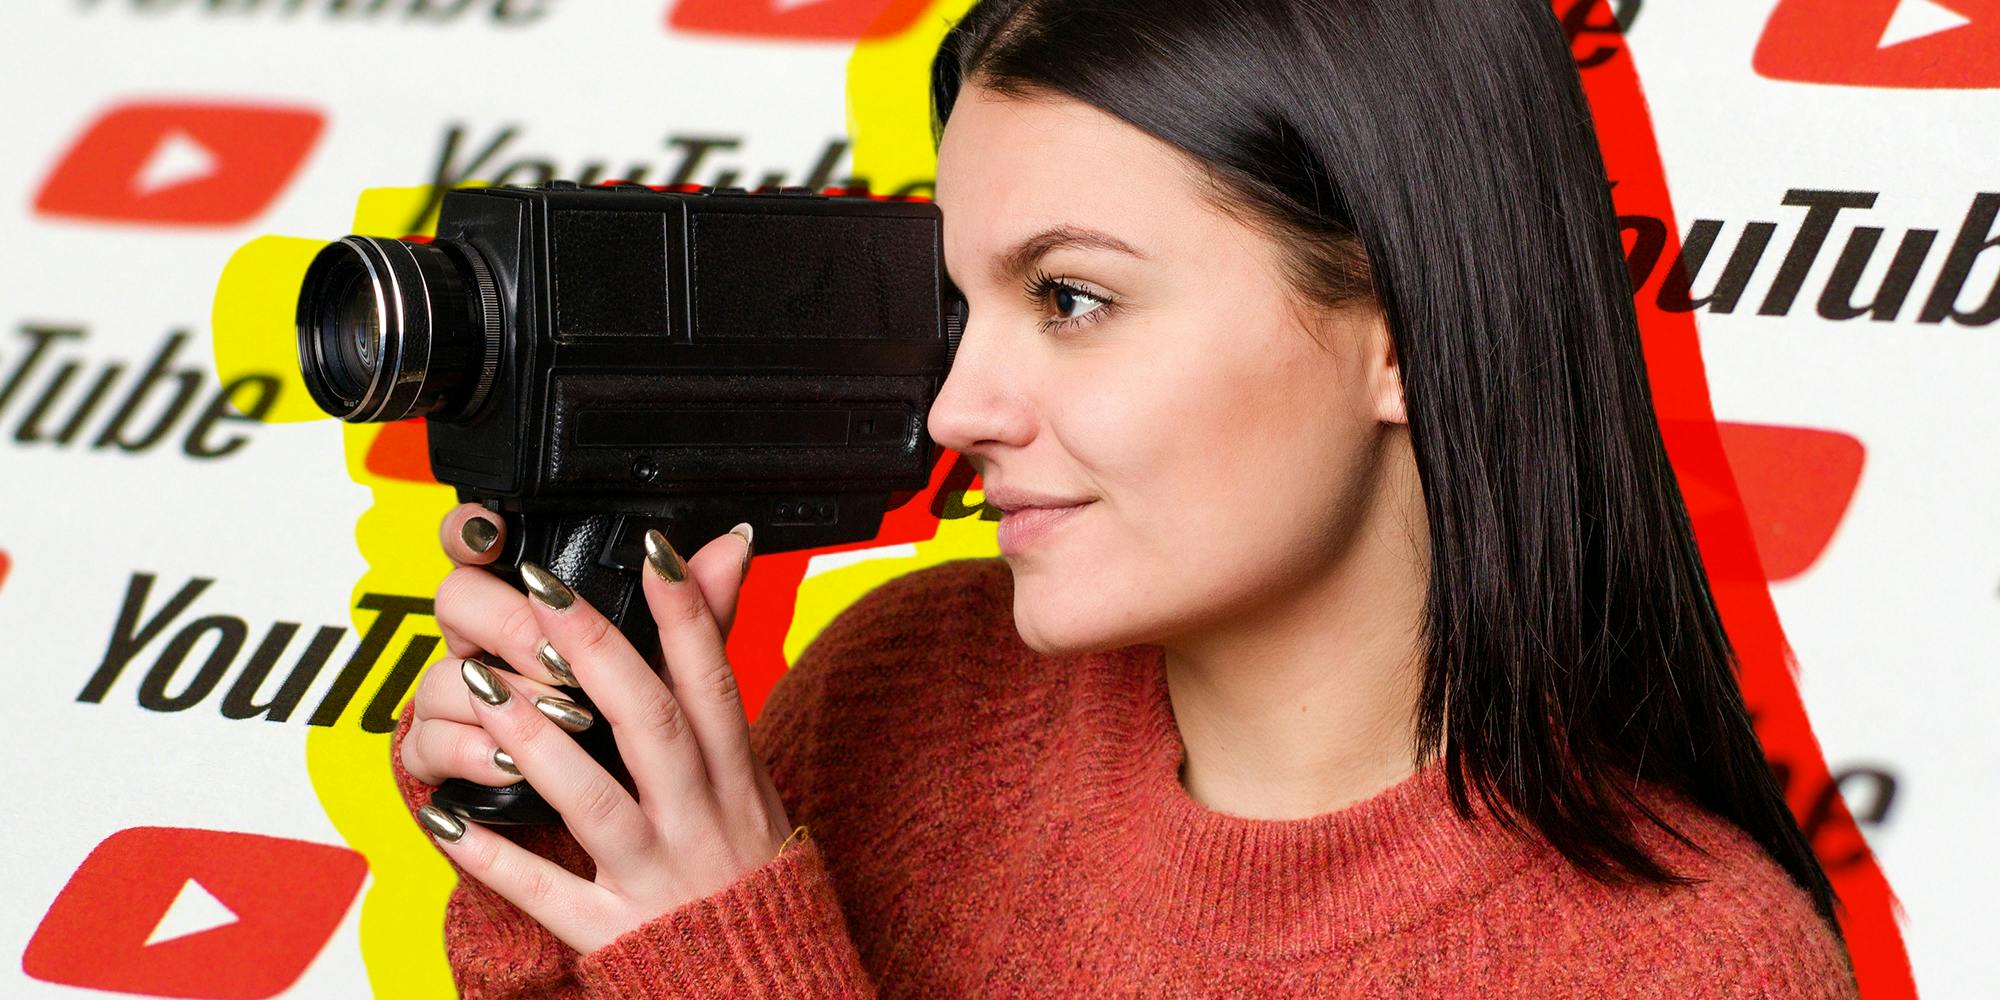 young woman with camera over YouTube logo background